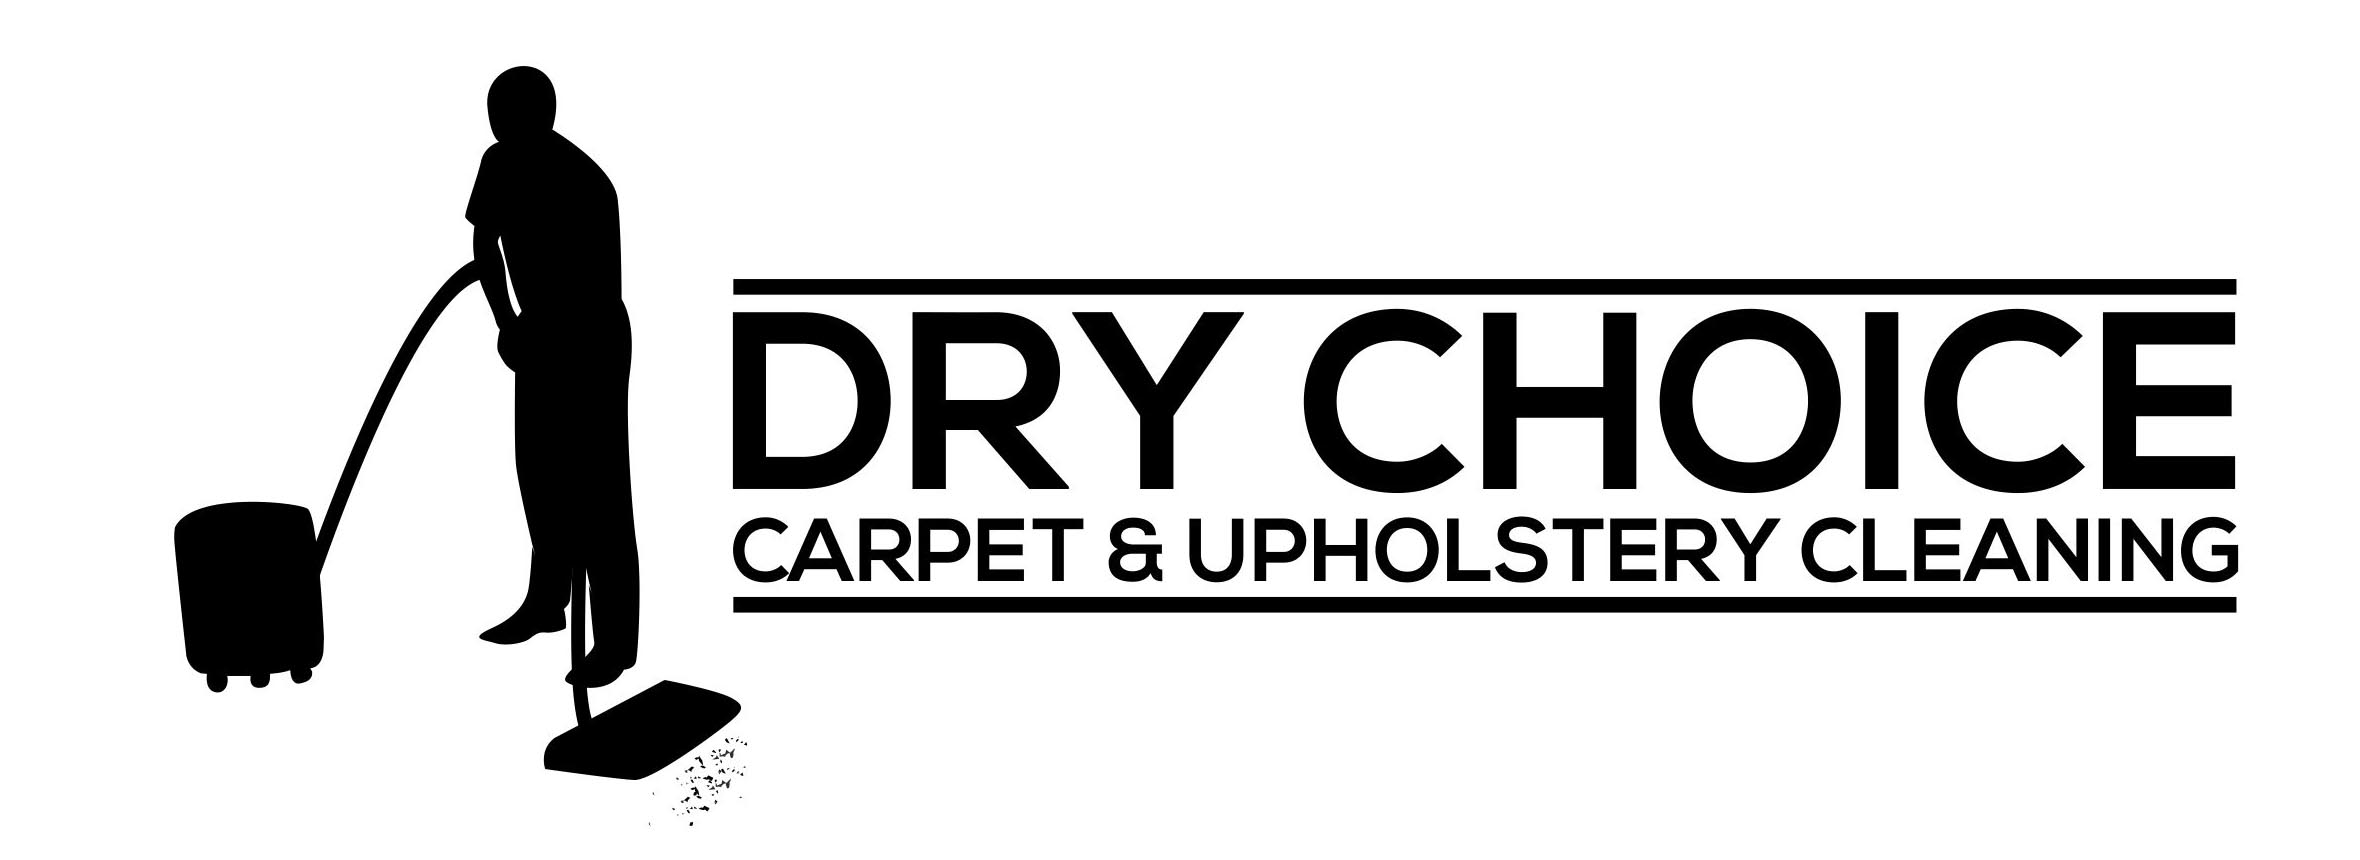 Dry Choice Carpet and Upholstery Cleaning in Milwaukee